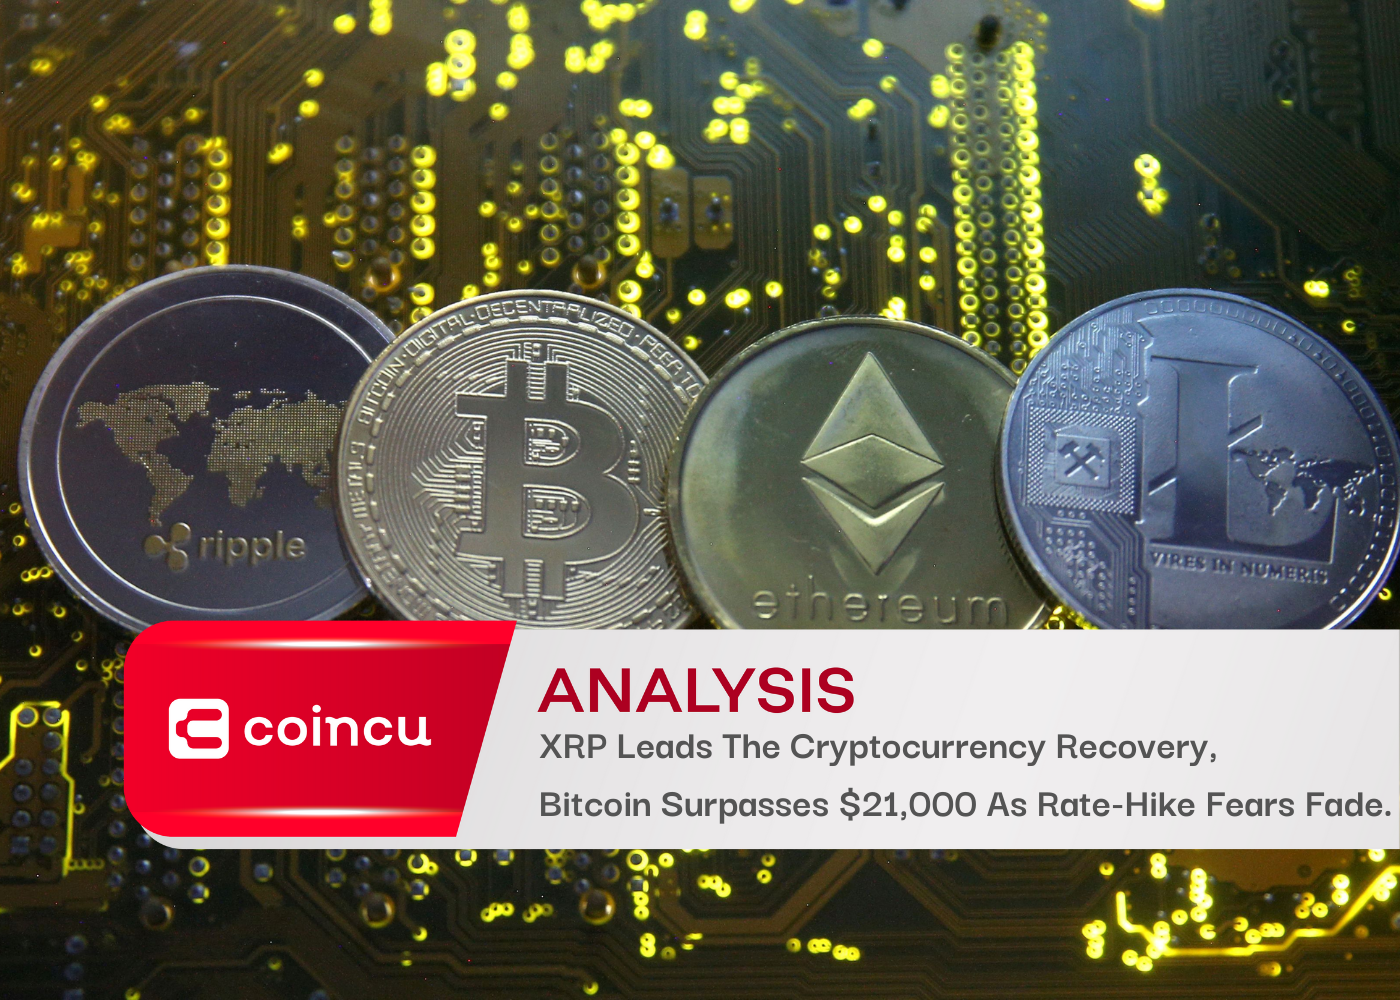 XRP Leads The Cryptocurrency Recovery, Bitcoin Surpasses $21,000 As Rate-Hike Fears Fade.